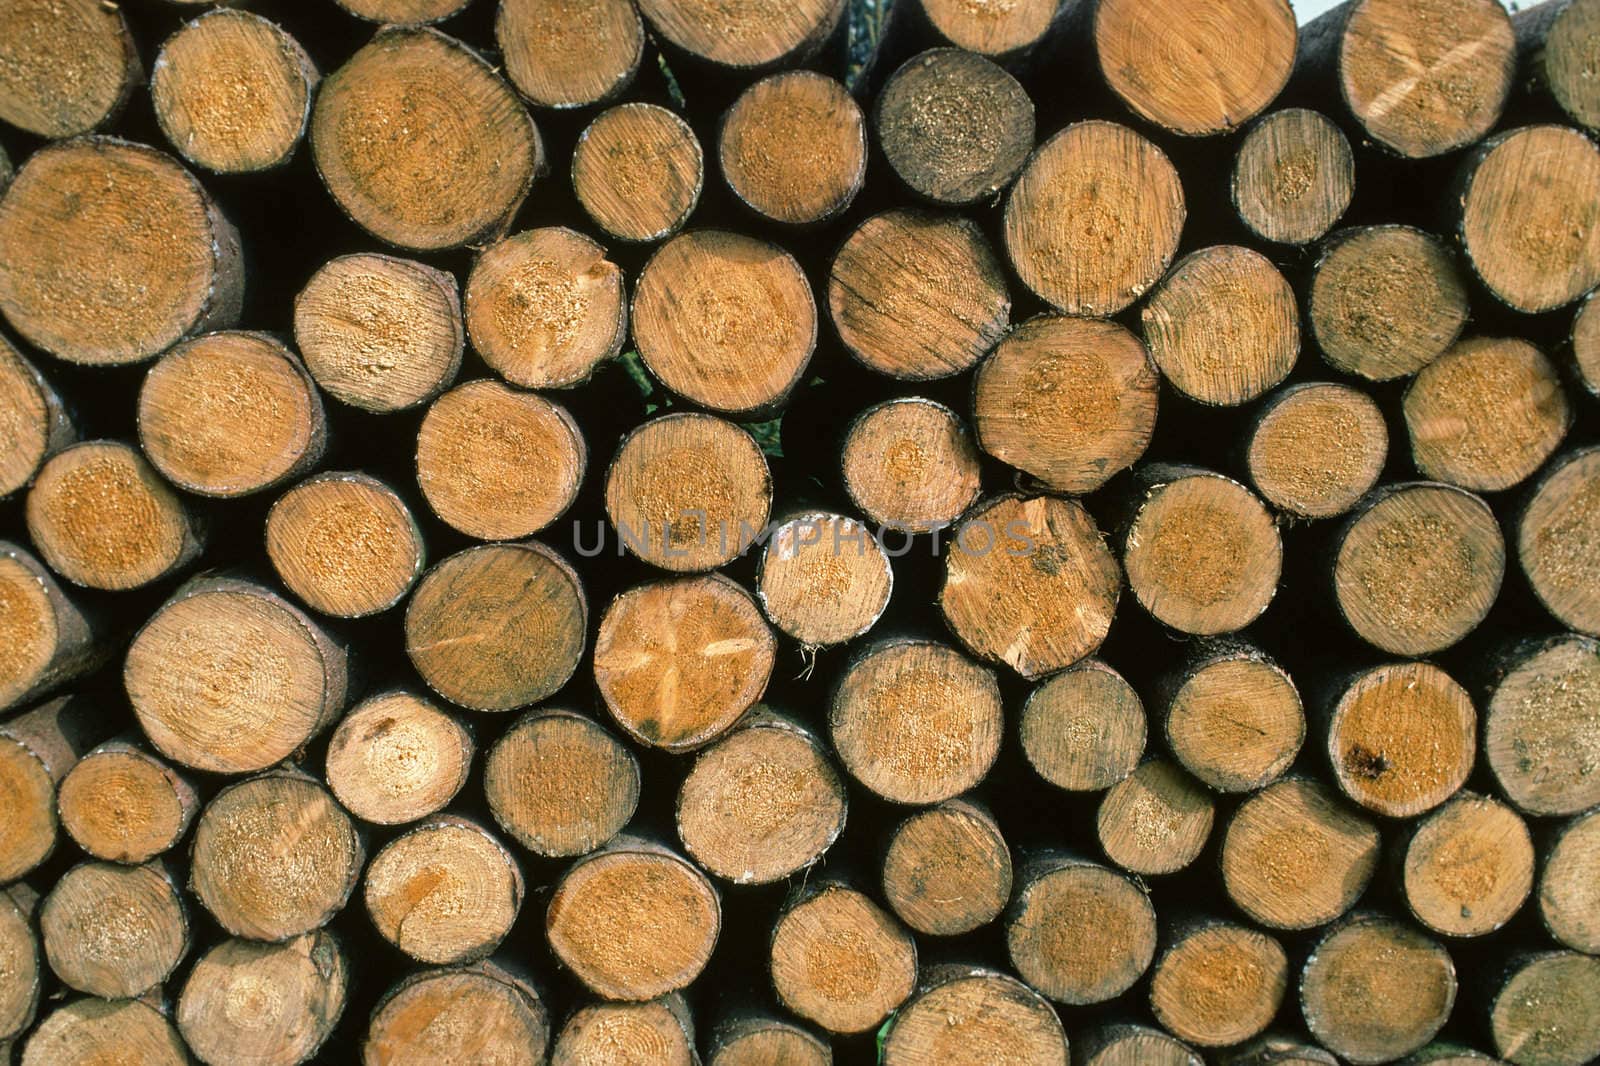 Wood by Natureandmore